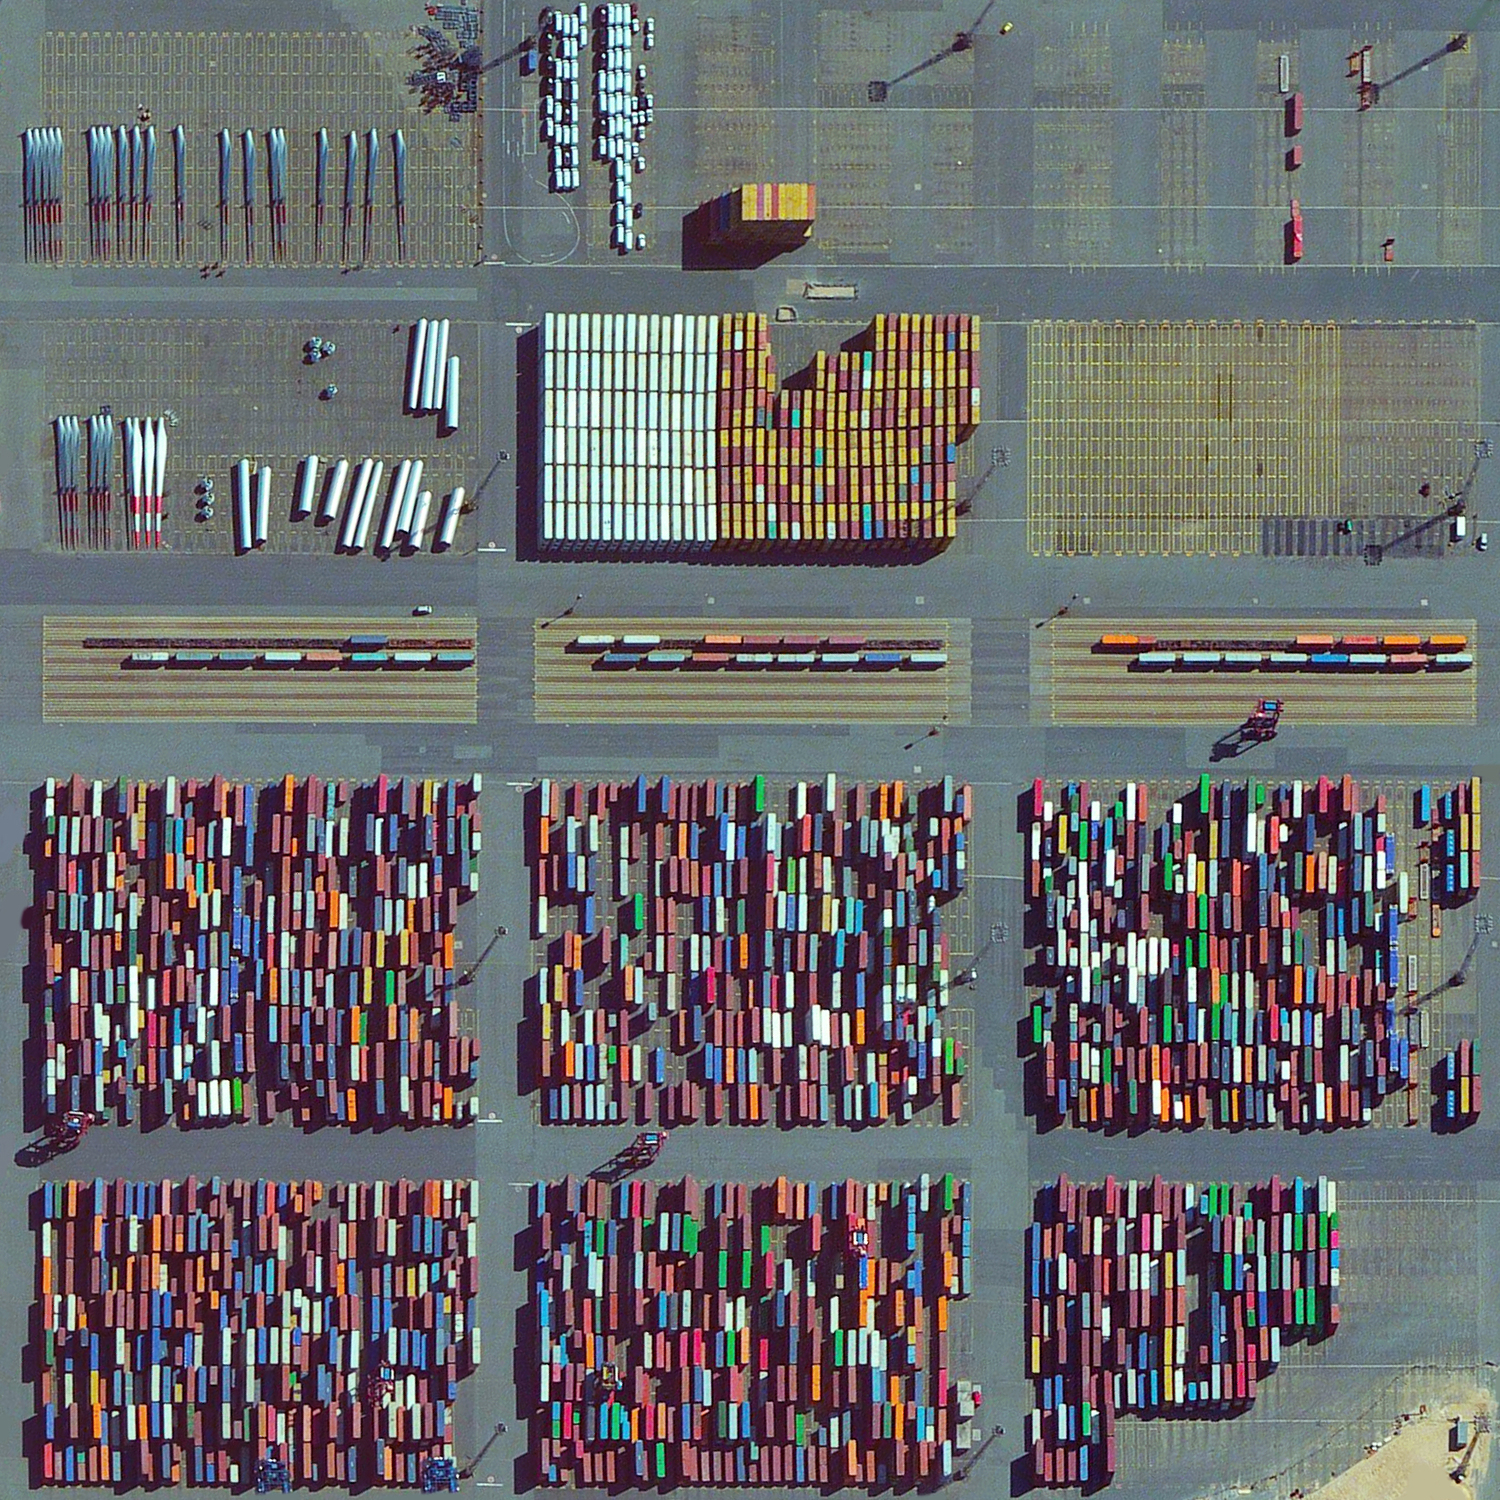   8/30/2015 Bremerhaven Port Bremen, Germany 53.584444960°, 8.536846512°   Thousands of items including shipping containers, wind turbine blades, and automobiles are prepared for transport at the Bremerhaven Port in Bremen, Germany. At any given moment, the port contains between 60,000 and 80,000 vehicles and it serves as the 23rd busiest port in the world with 5,831 thousand TEU's moved each year. With this post we’ll be signing off on vacation for the week and look forward to more posts when we get back!